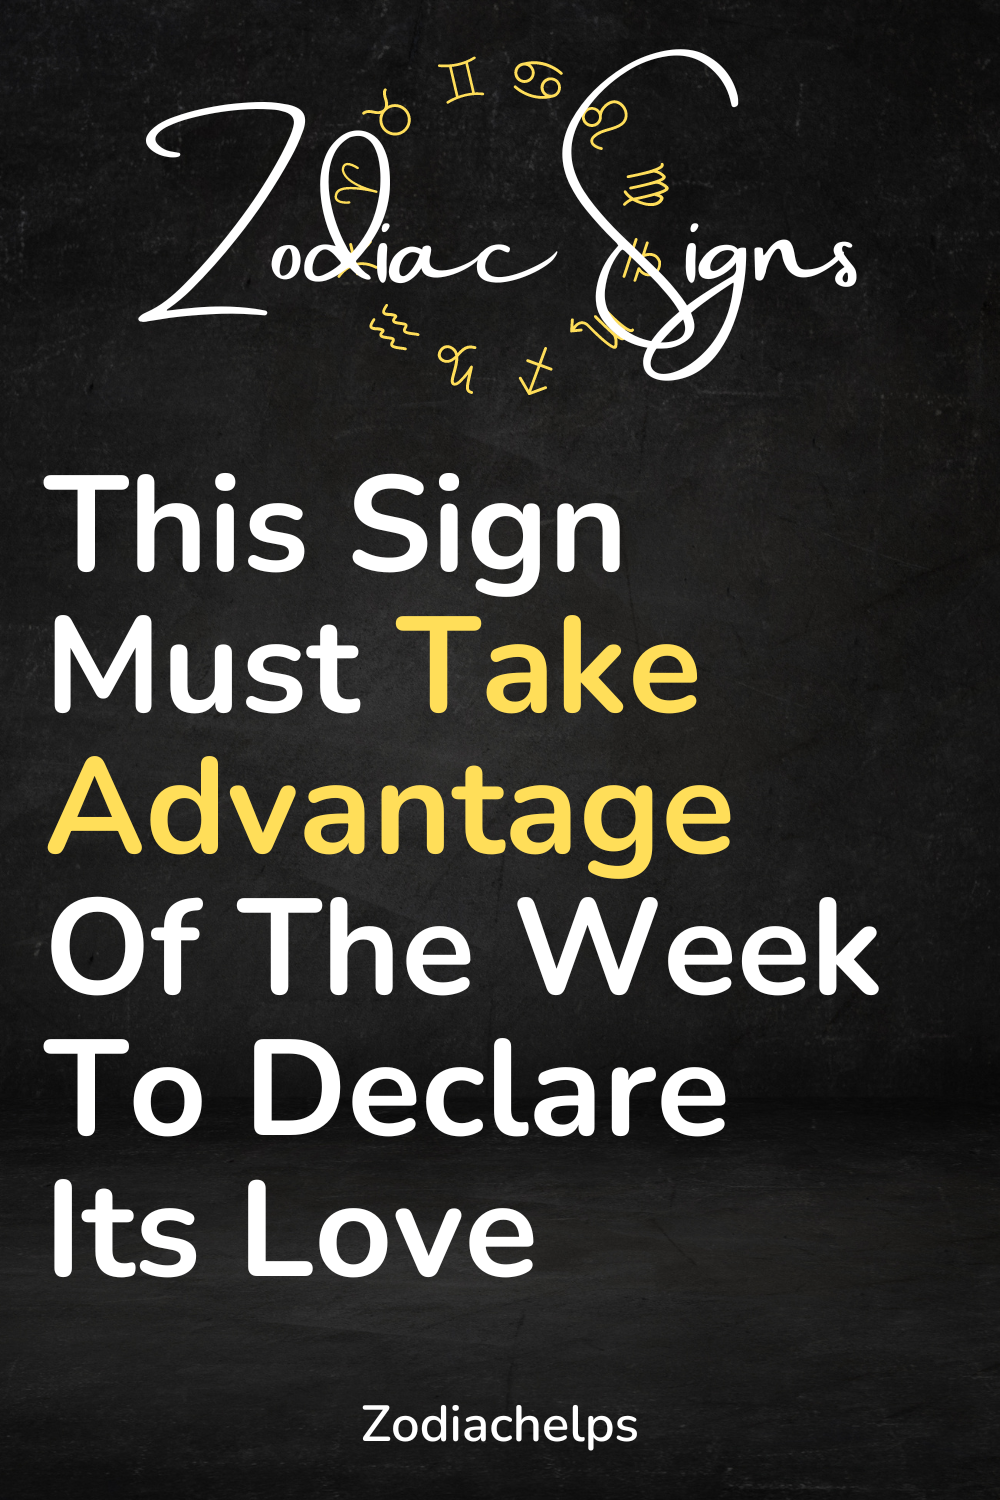 This Sign Must Take Advantage Of The Week To Declare Its Love